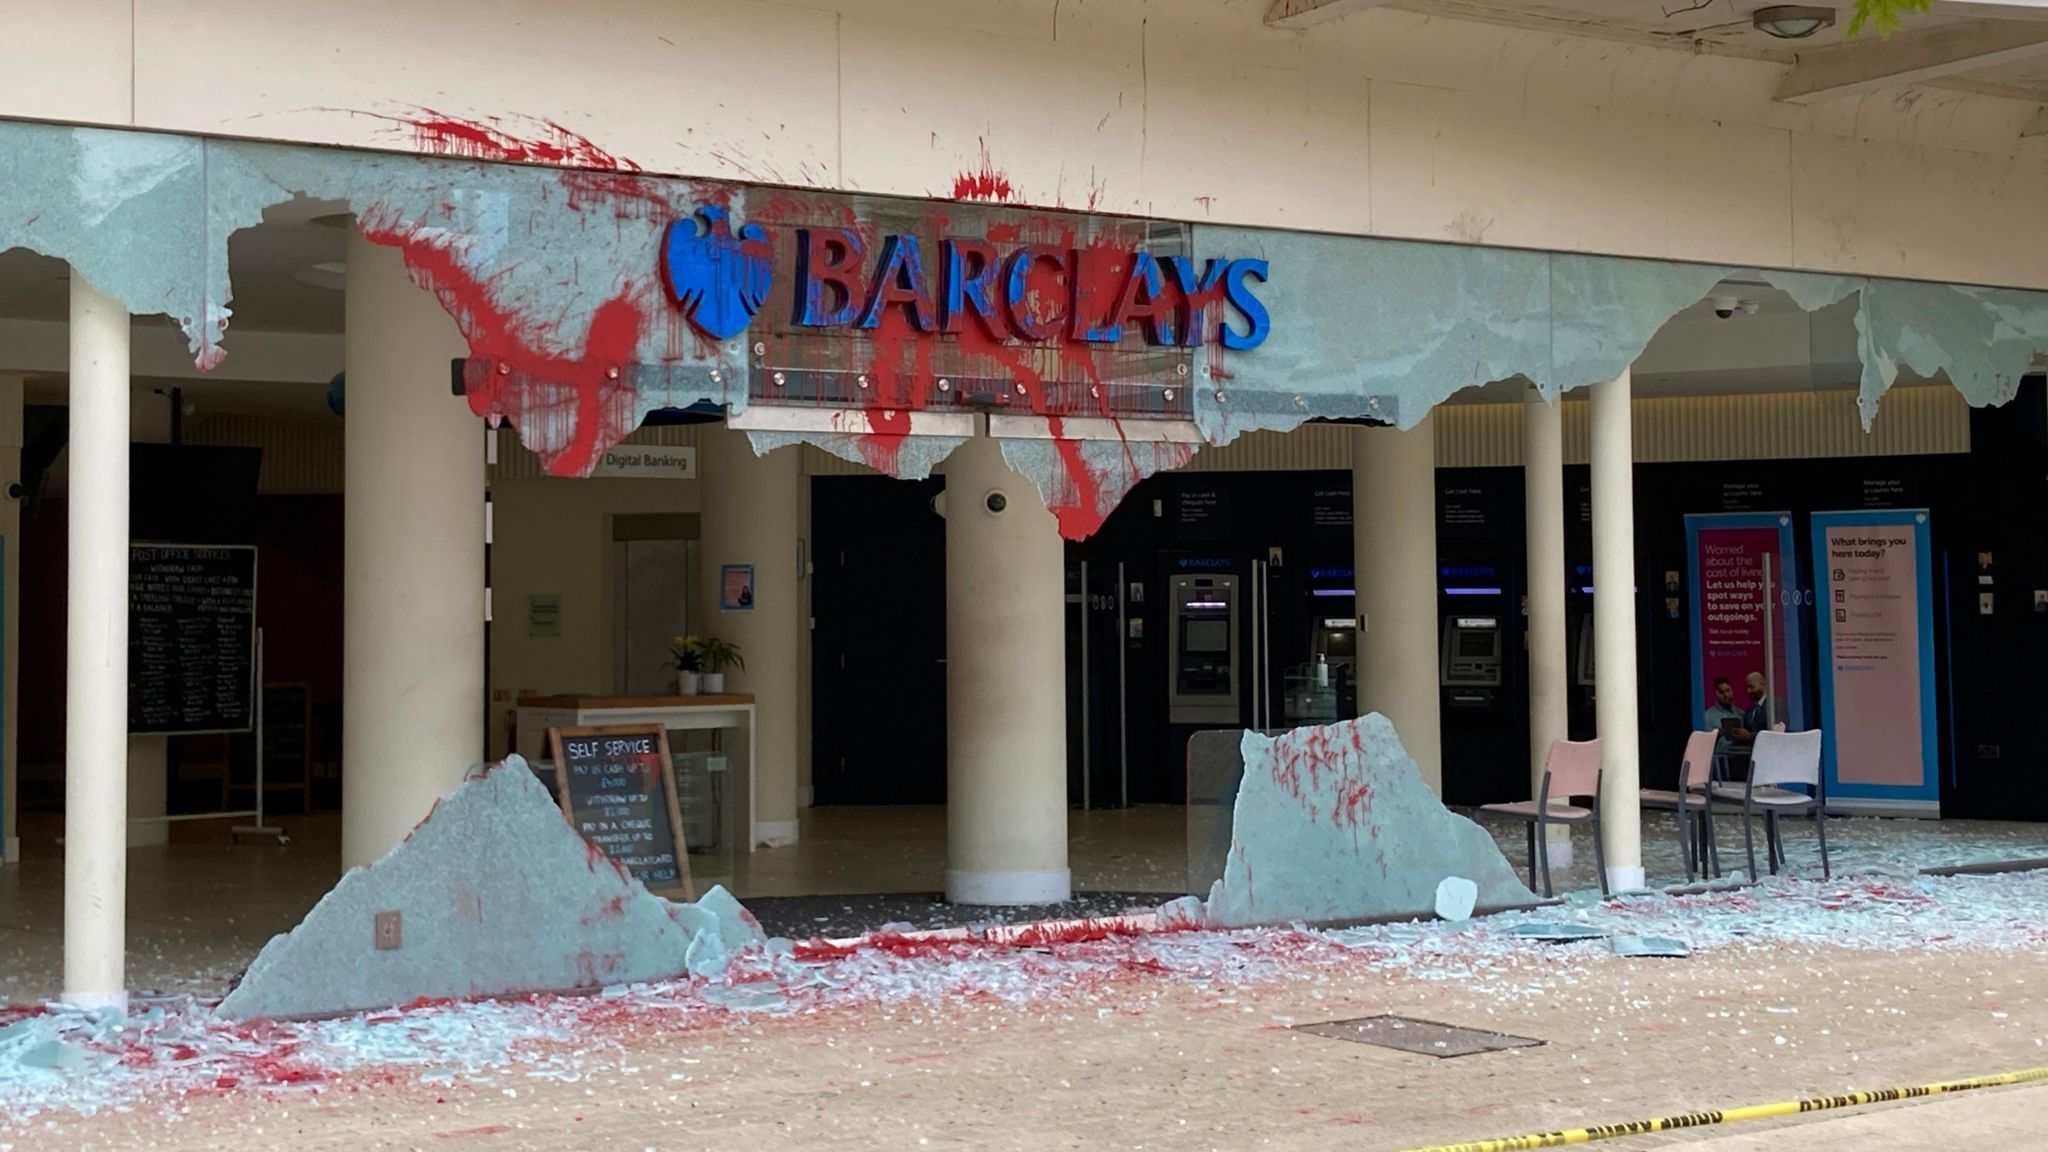 Smashed window at the entrance of Barclays Bank with red paint sprayed around building 